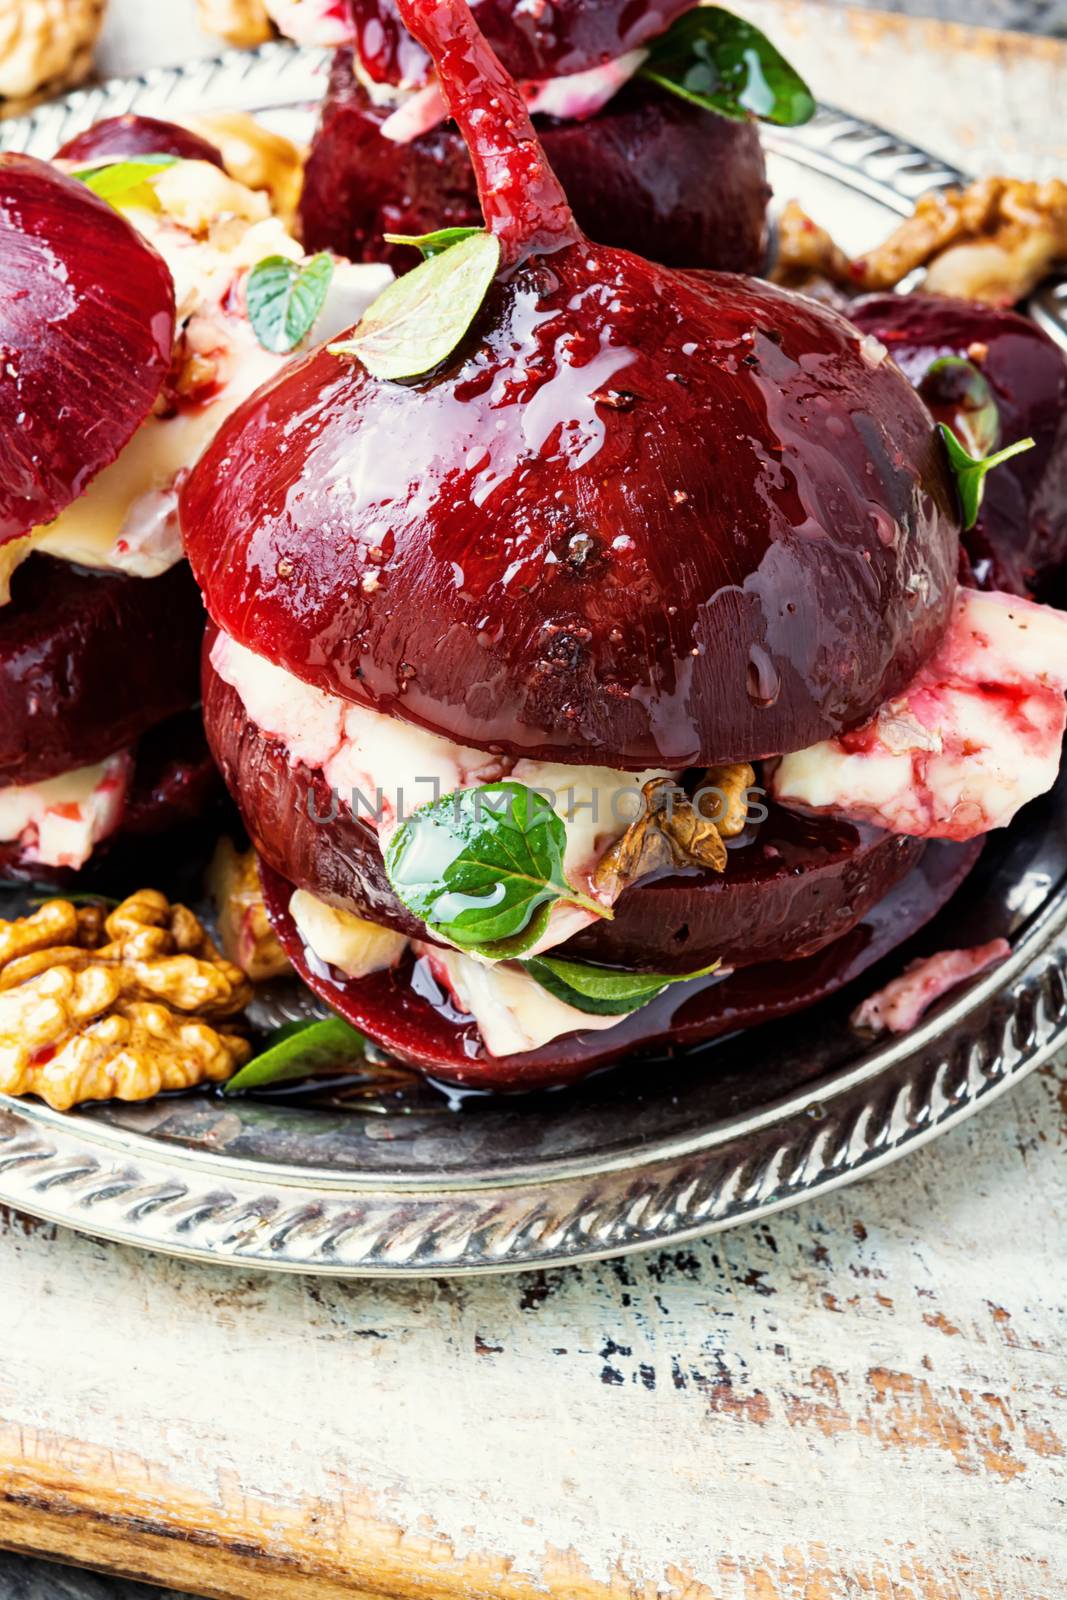 Boiled beetroot with soft cheese and walnut